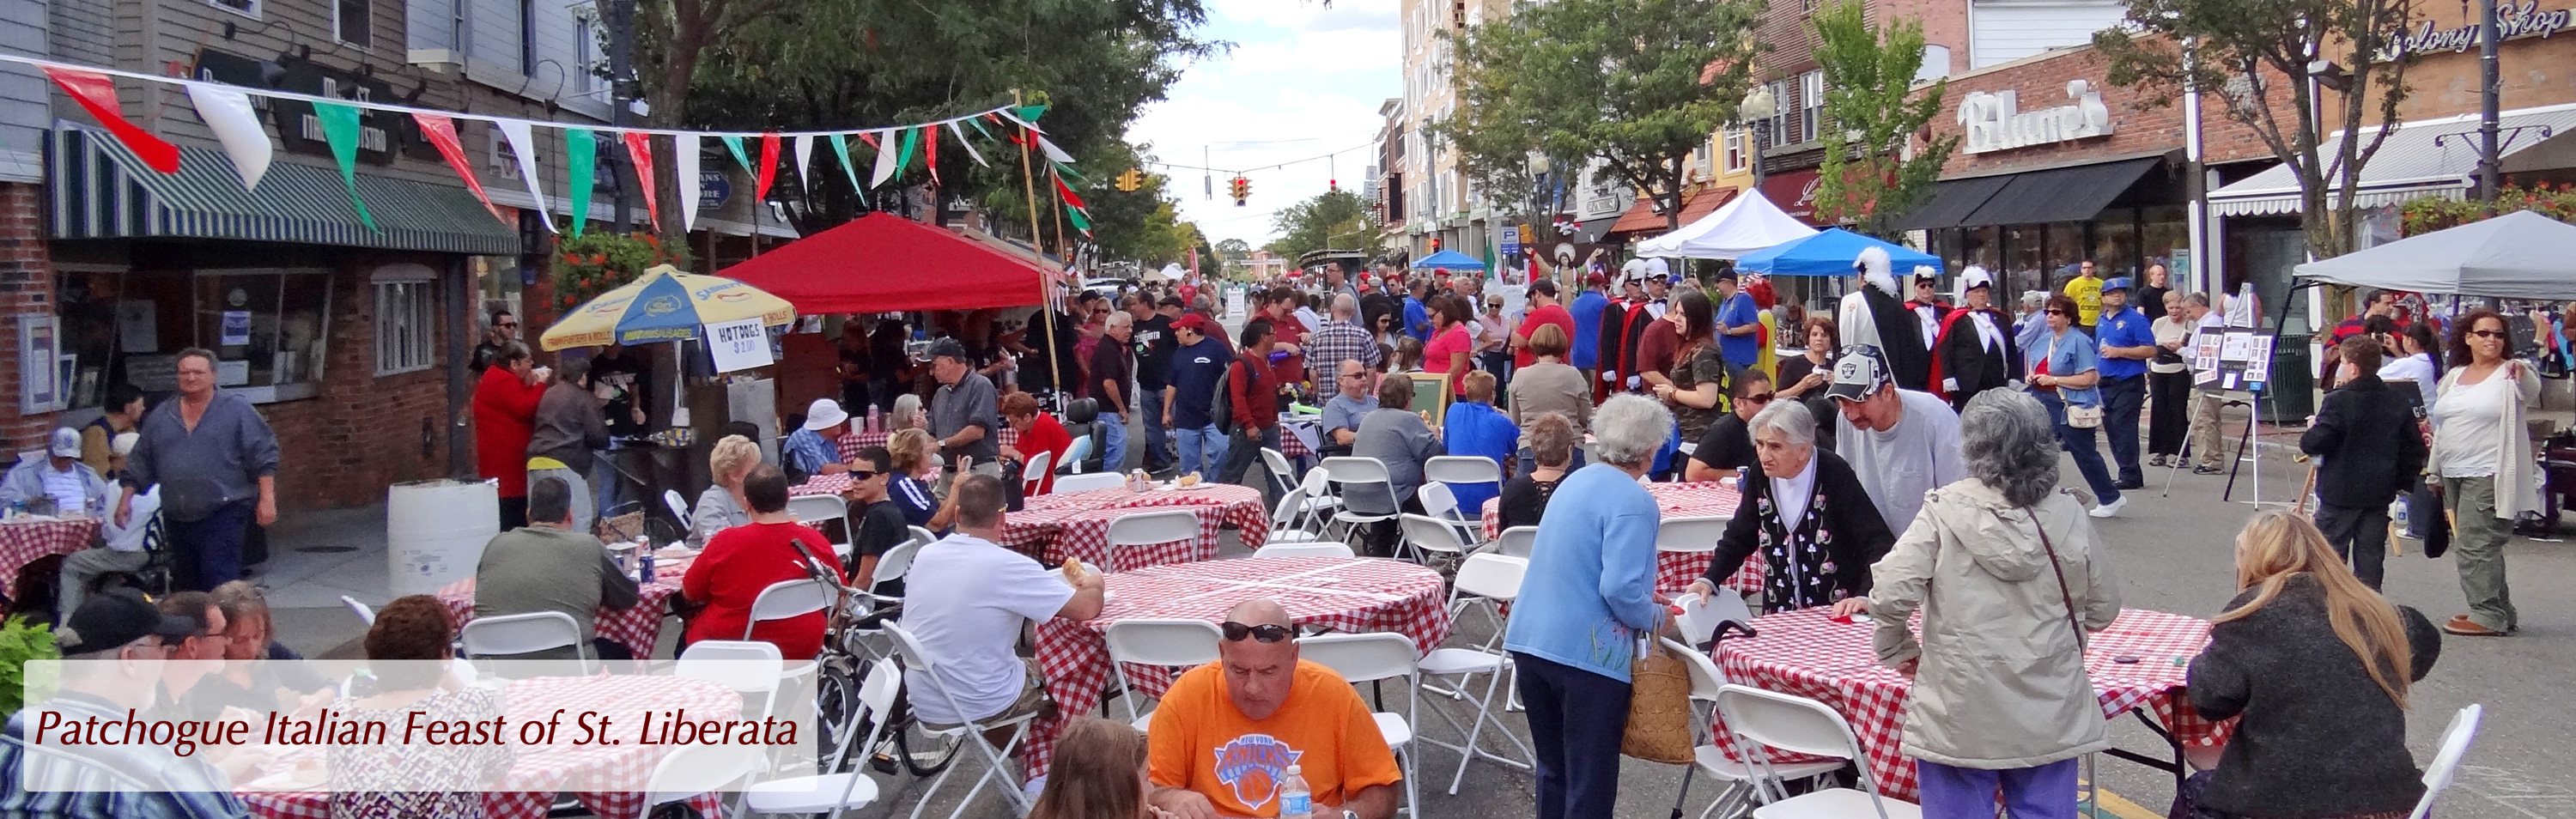 Attendees enjoying the various food options on Main Street